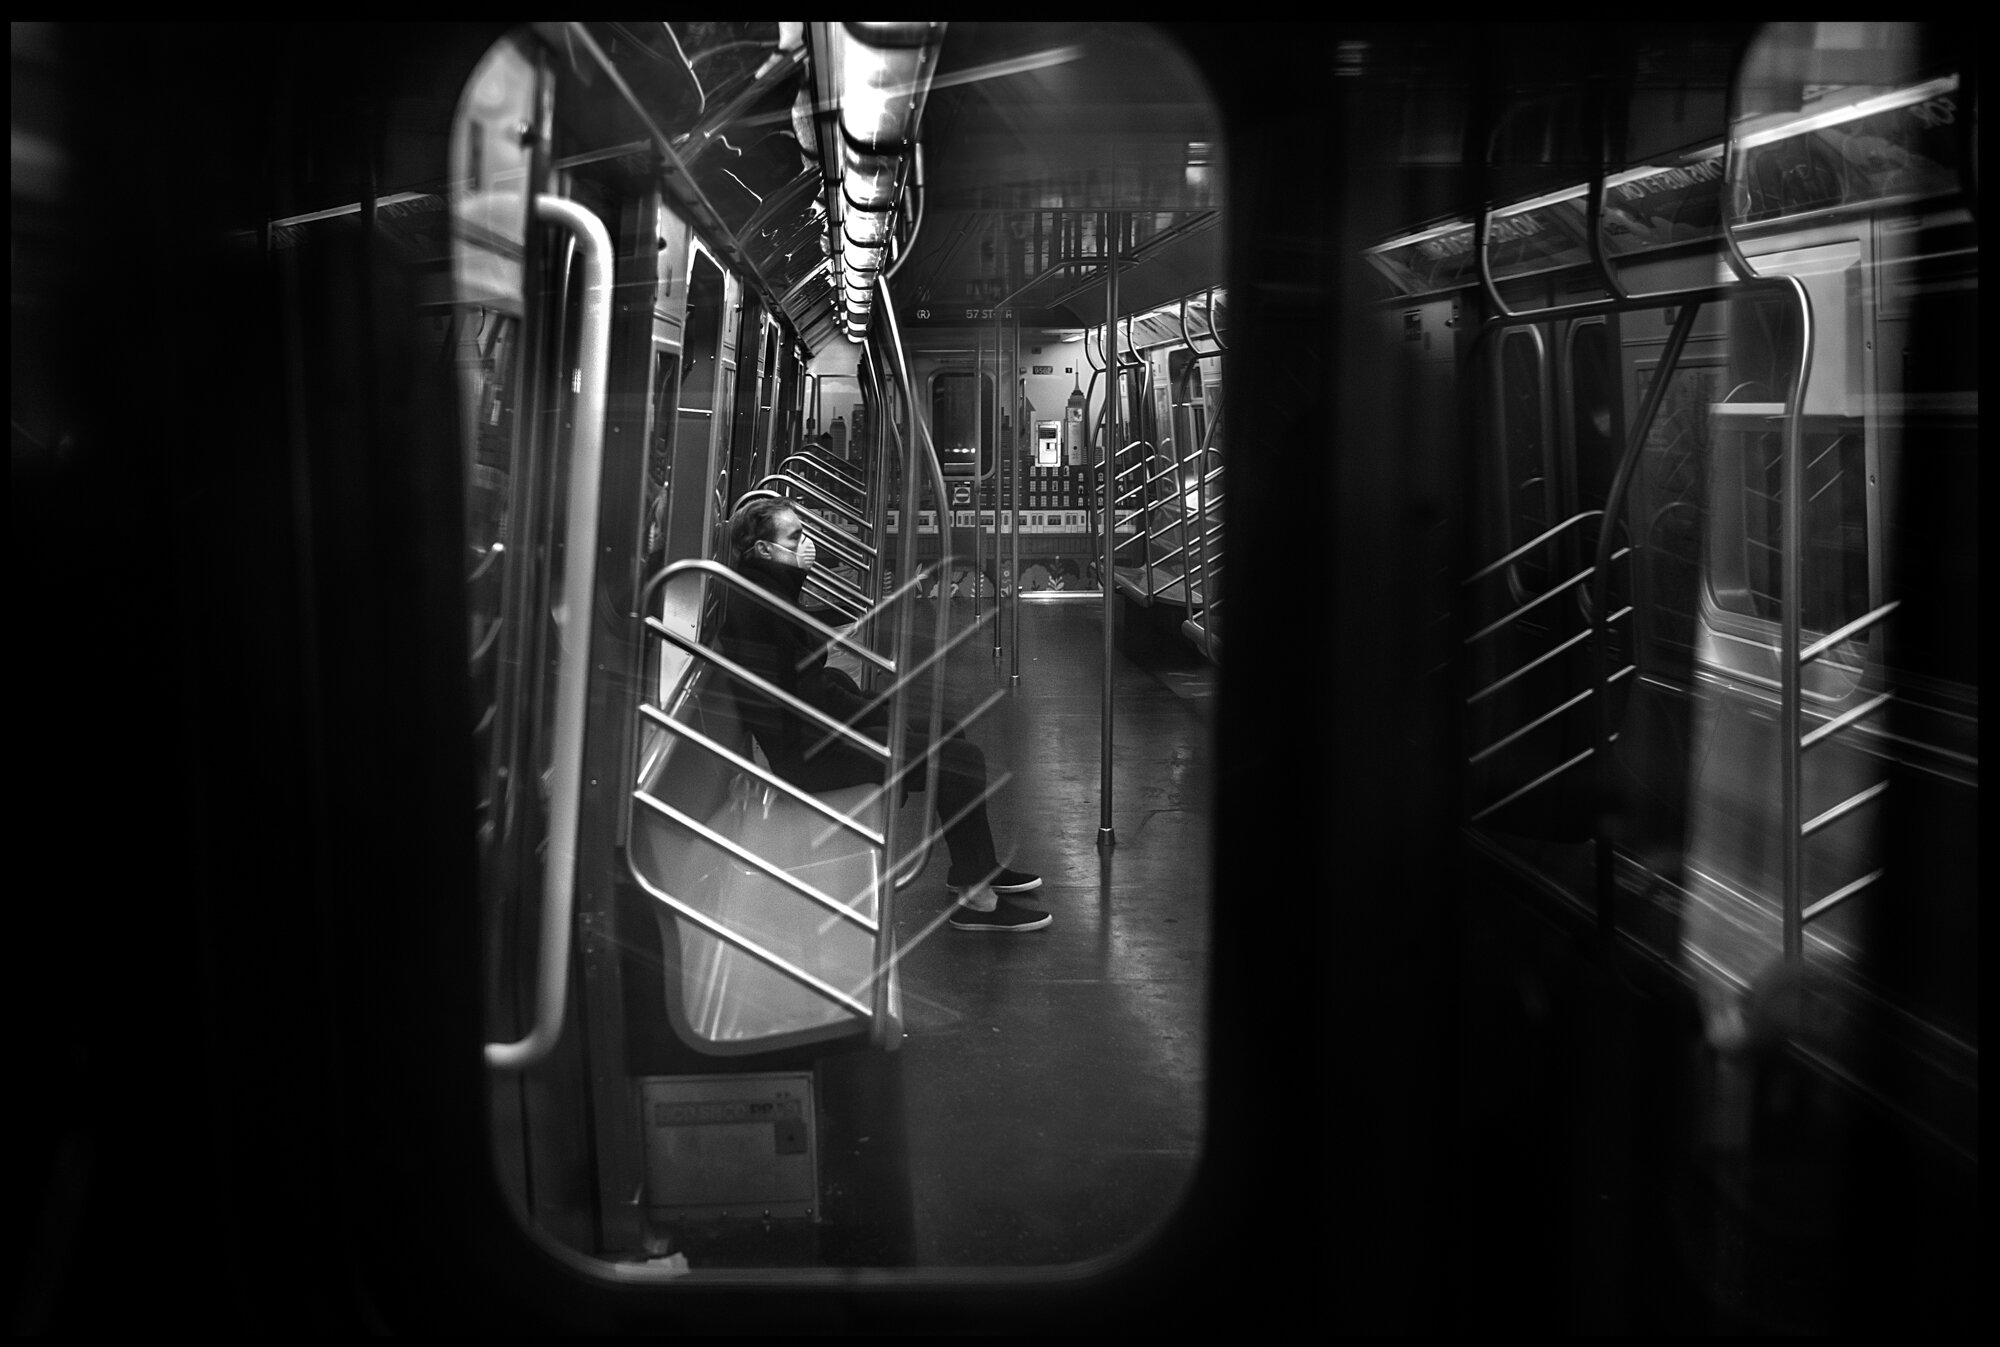  A man rides the train alone from Queens towards Manhattan.   March 29, 2020. © Peter Turnley   ID# 15-001 